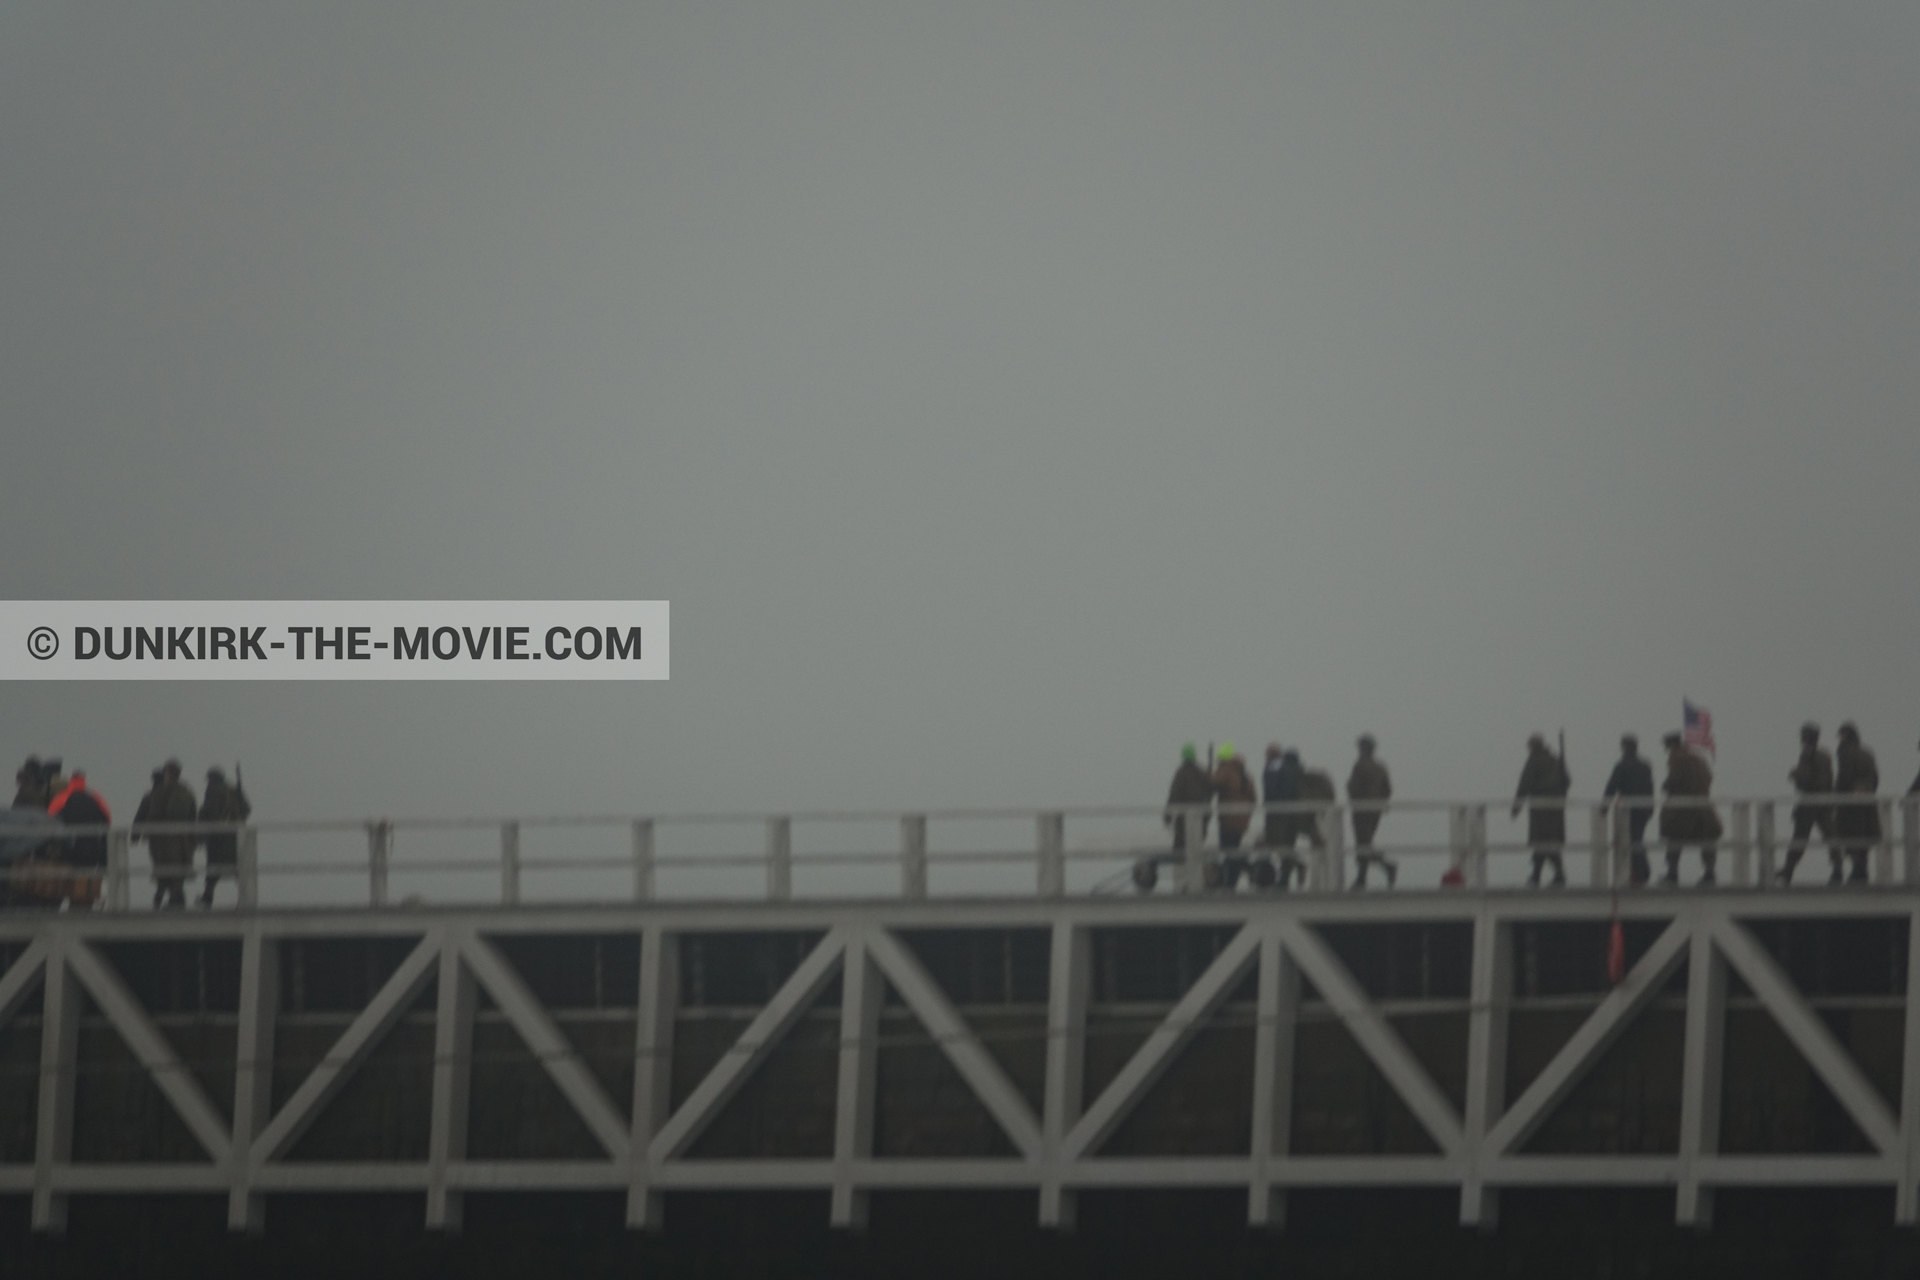 Picture with supernumeraries, EST pier,  from behind the scene of the Dunkirk movie by Nolan